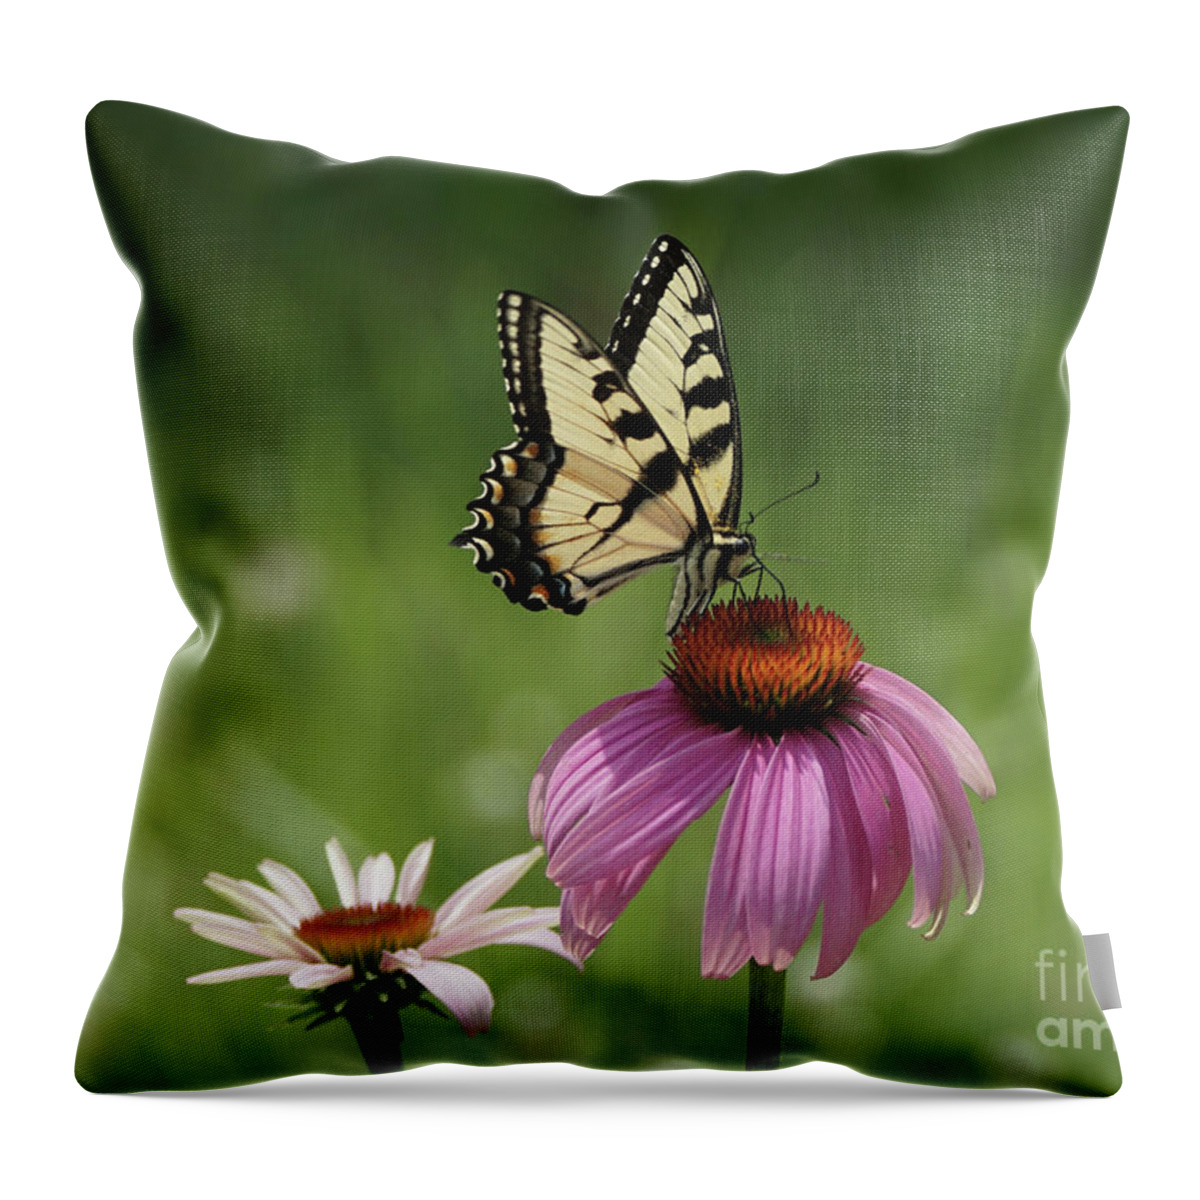 Butterfly Throw Pillow featuring the photograph Tiger Swallowtail Butterfly and Coneflowers by Robert E Alter Reflections of Infinity